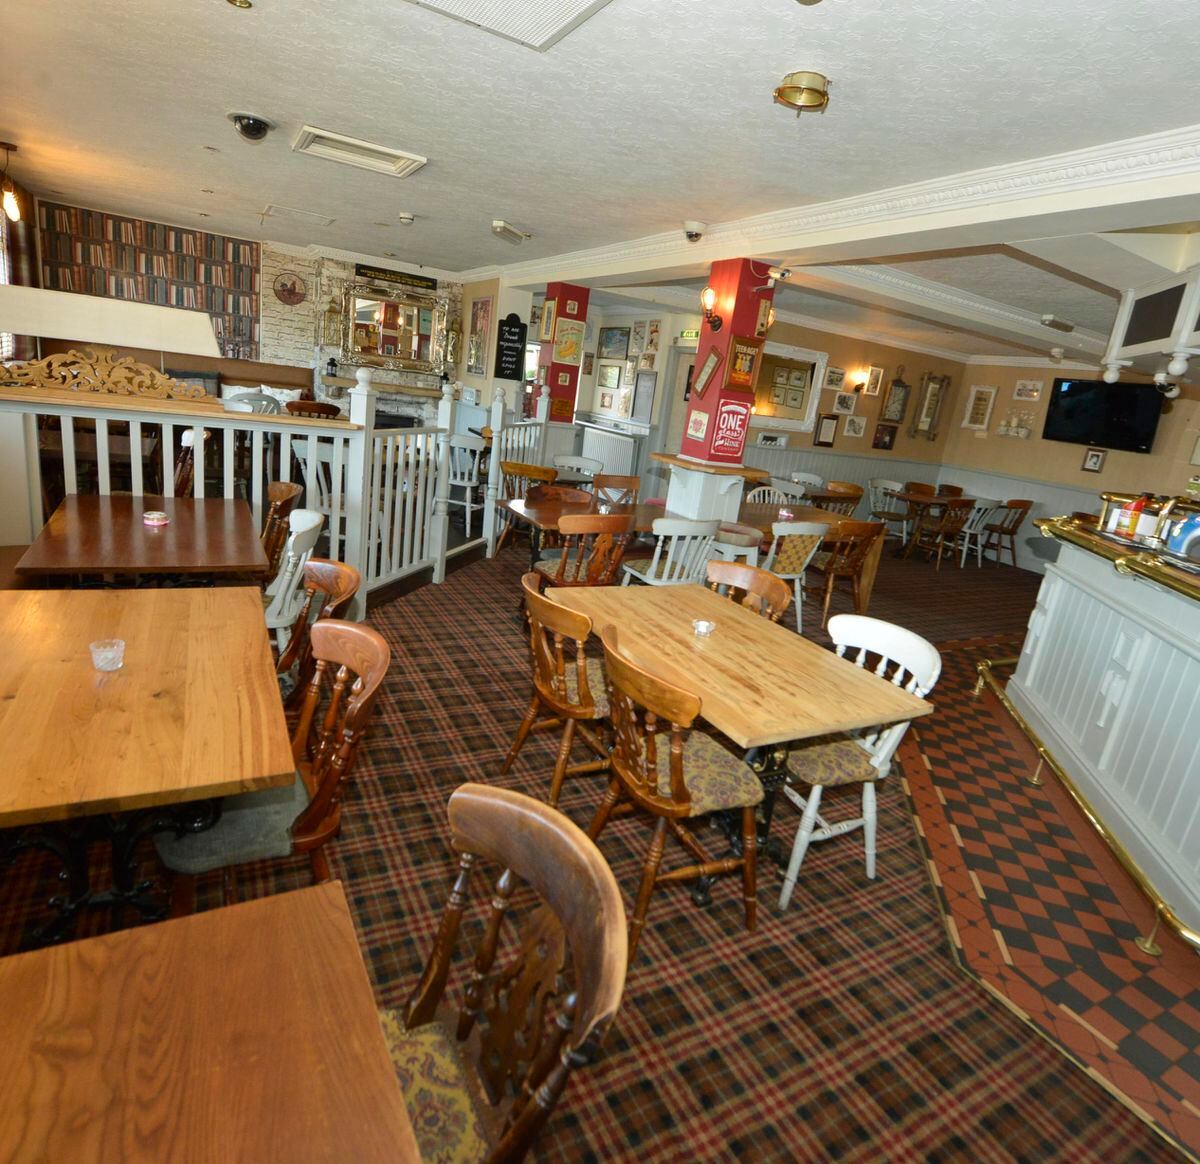 Home comforts – the interior of the Crown Inn